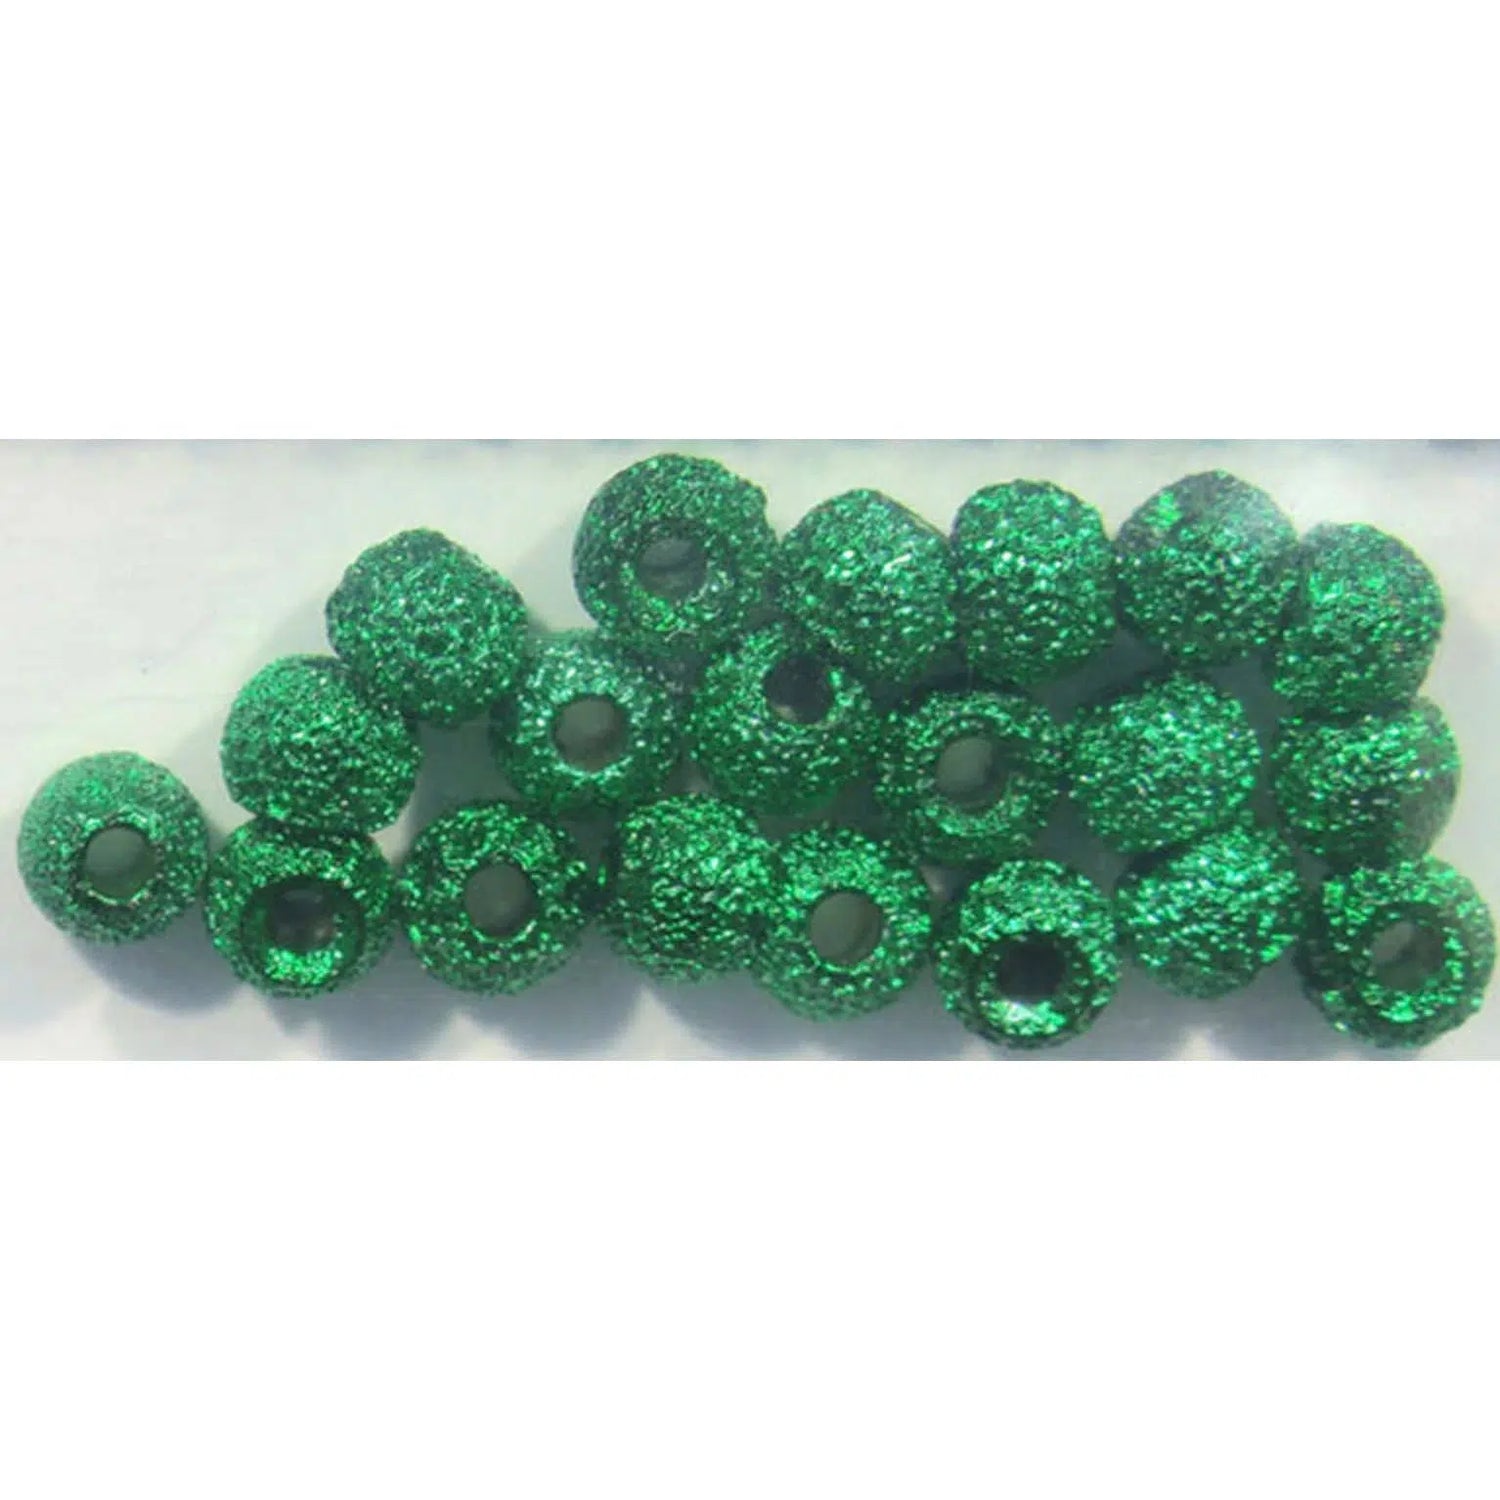 Hareline Gritty Tungsten Beads-Fly Fishing - Fly Tying Material-Hareline Dubbin LLC-5/32"-Green Grit-Fishing Station